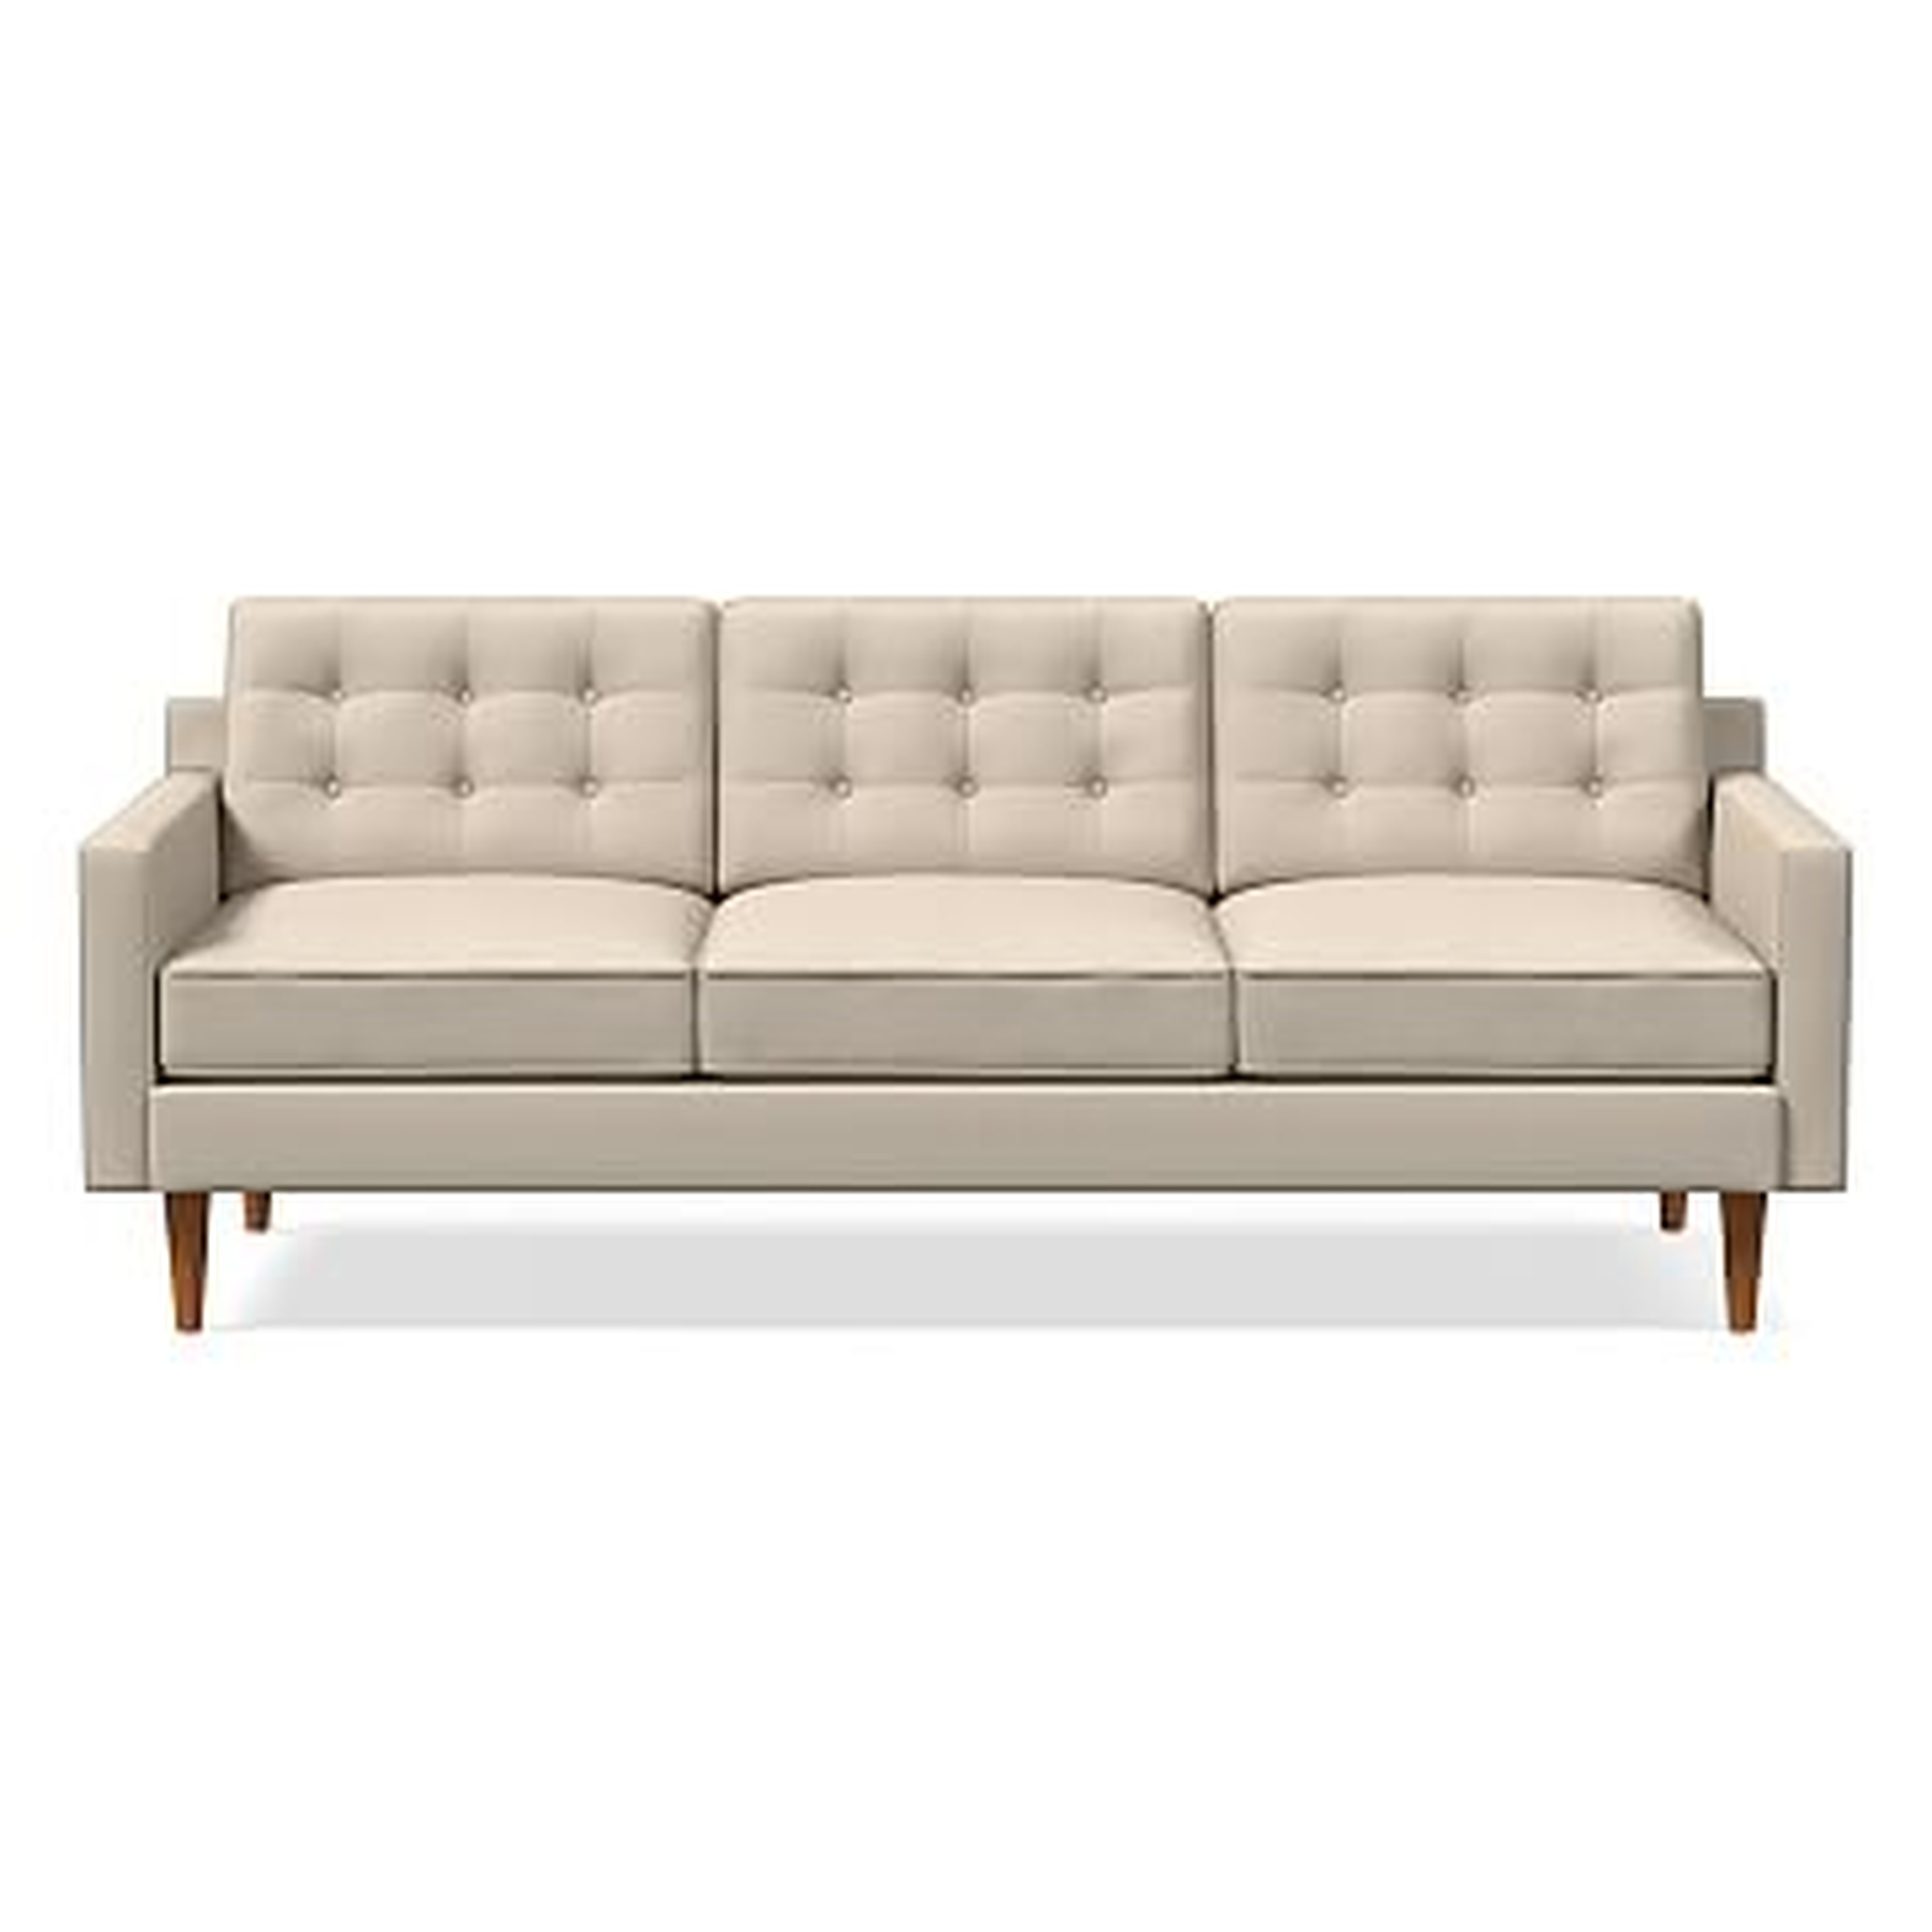 Drake Midcentury 86" Sofa, Poly, Performance Washed Canvas, Natural, Pecan - West Elm